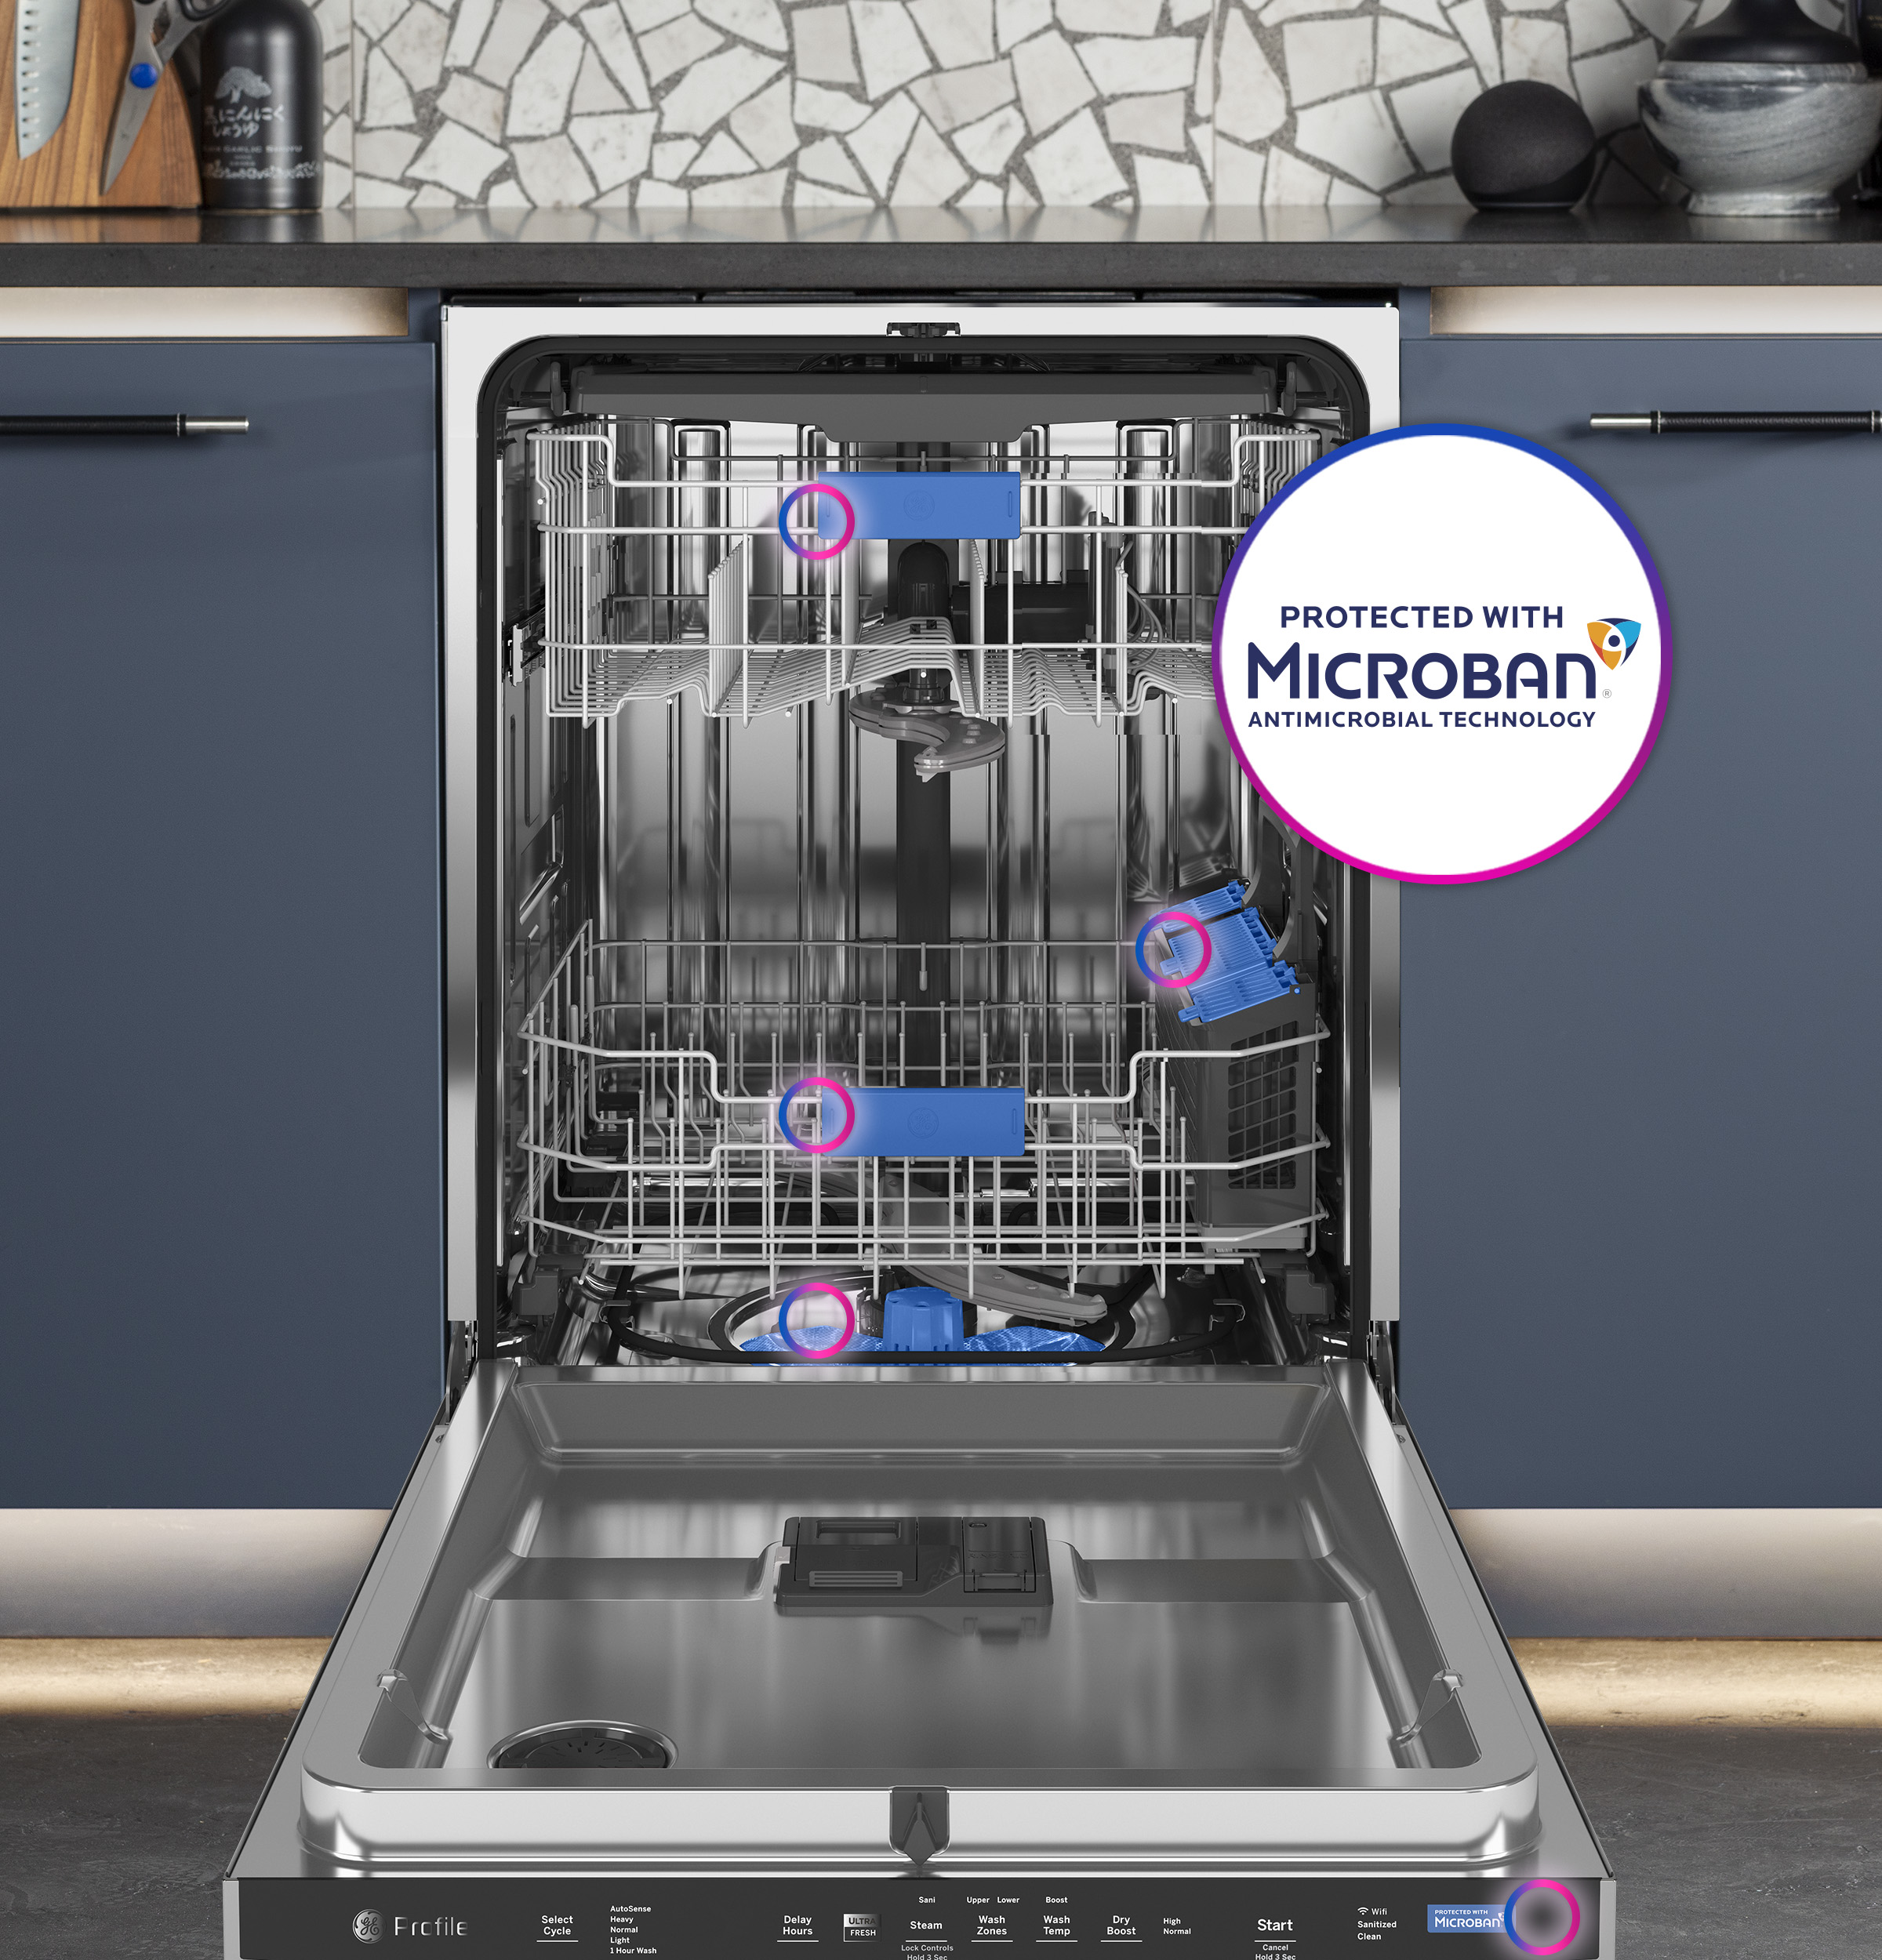 This Handheld Electric Dishwasher Helps Enable Your Laziness